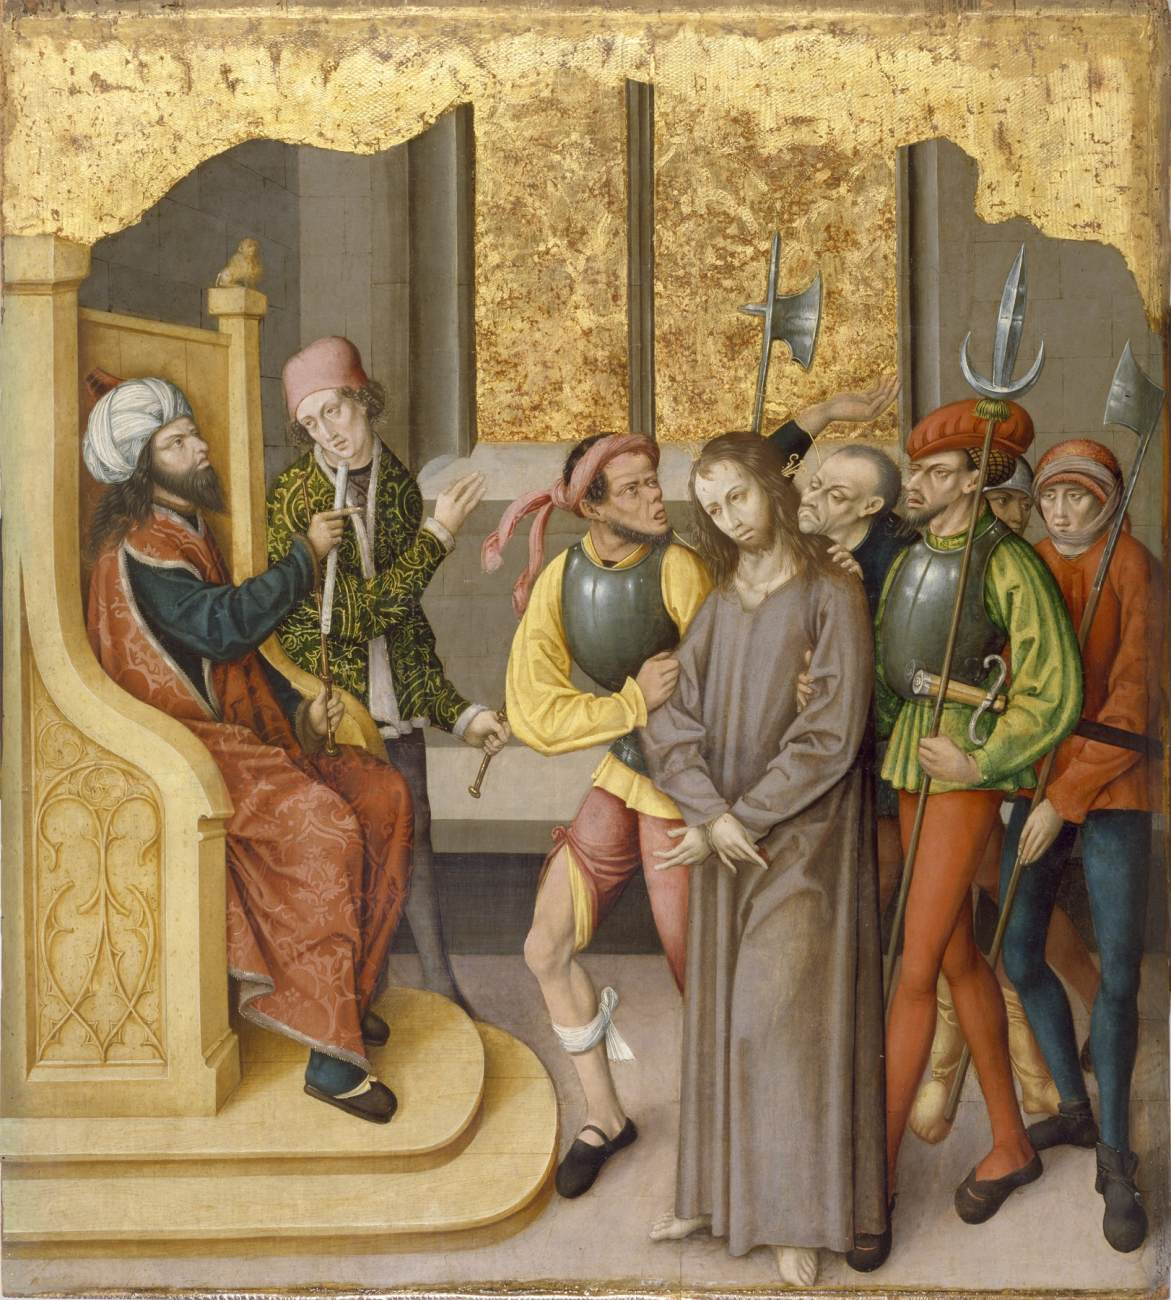 Altarpiece with The Passion of the Christ: Christ Before the High Priest